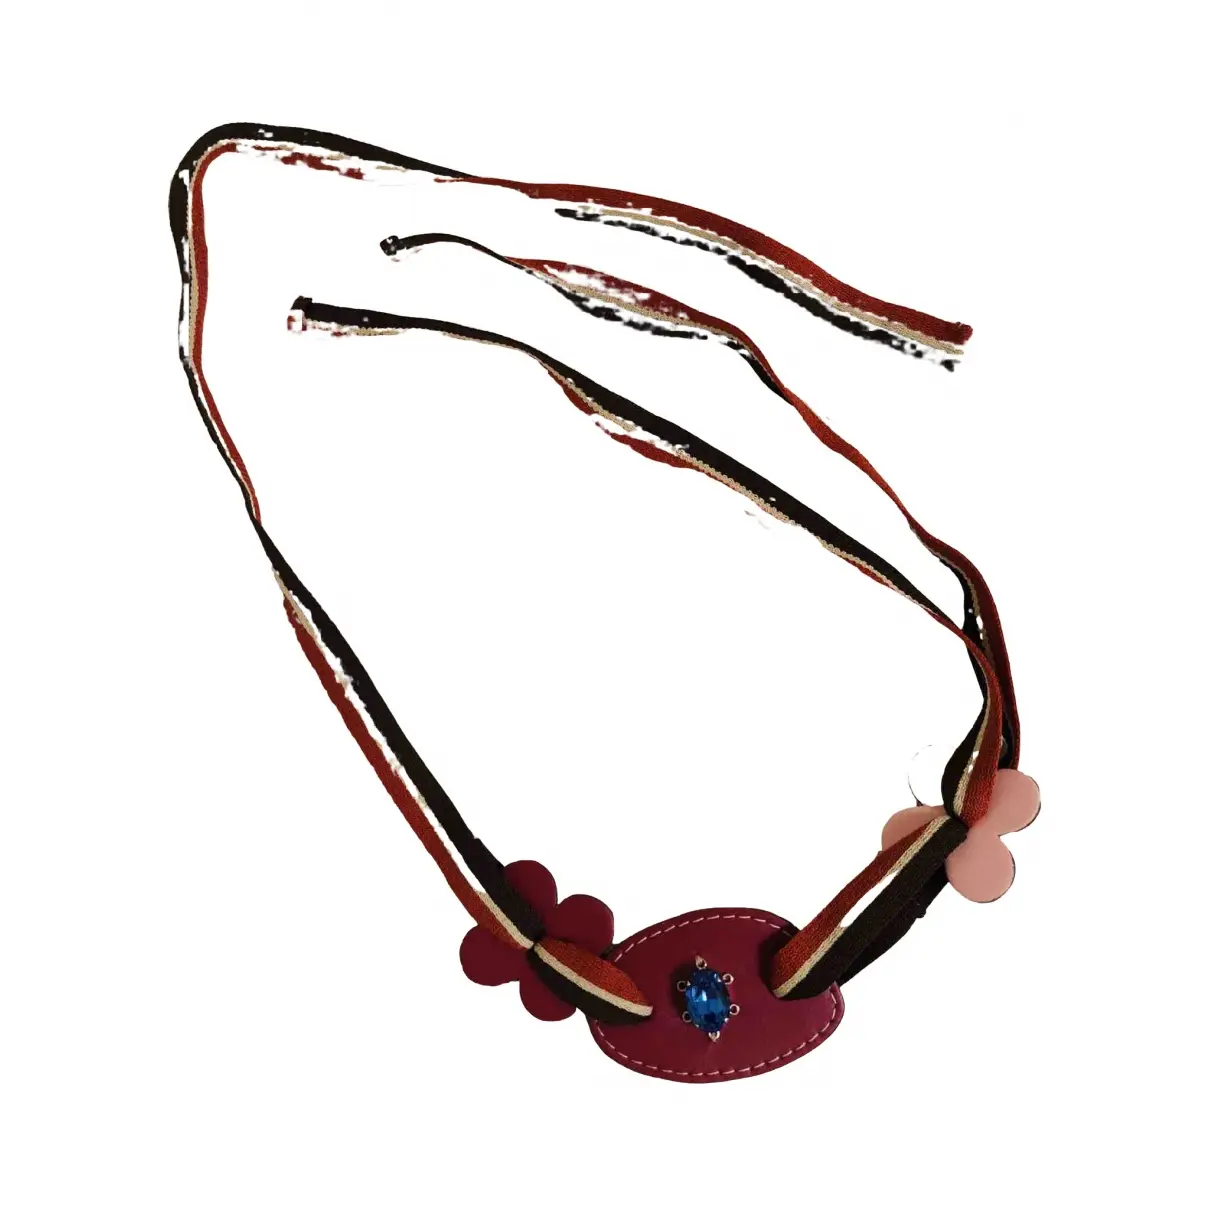 Leather necklace Marni